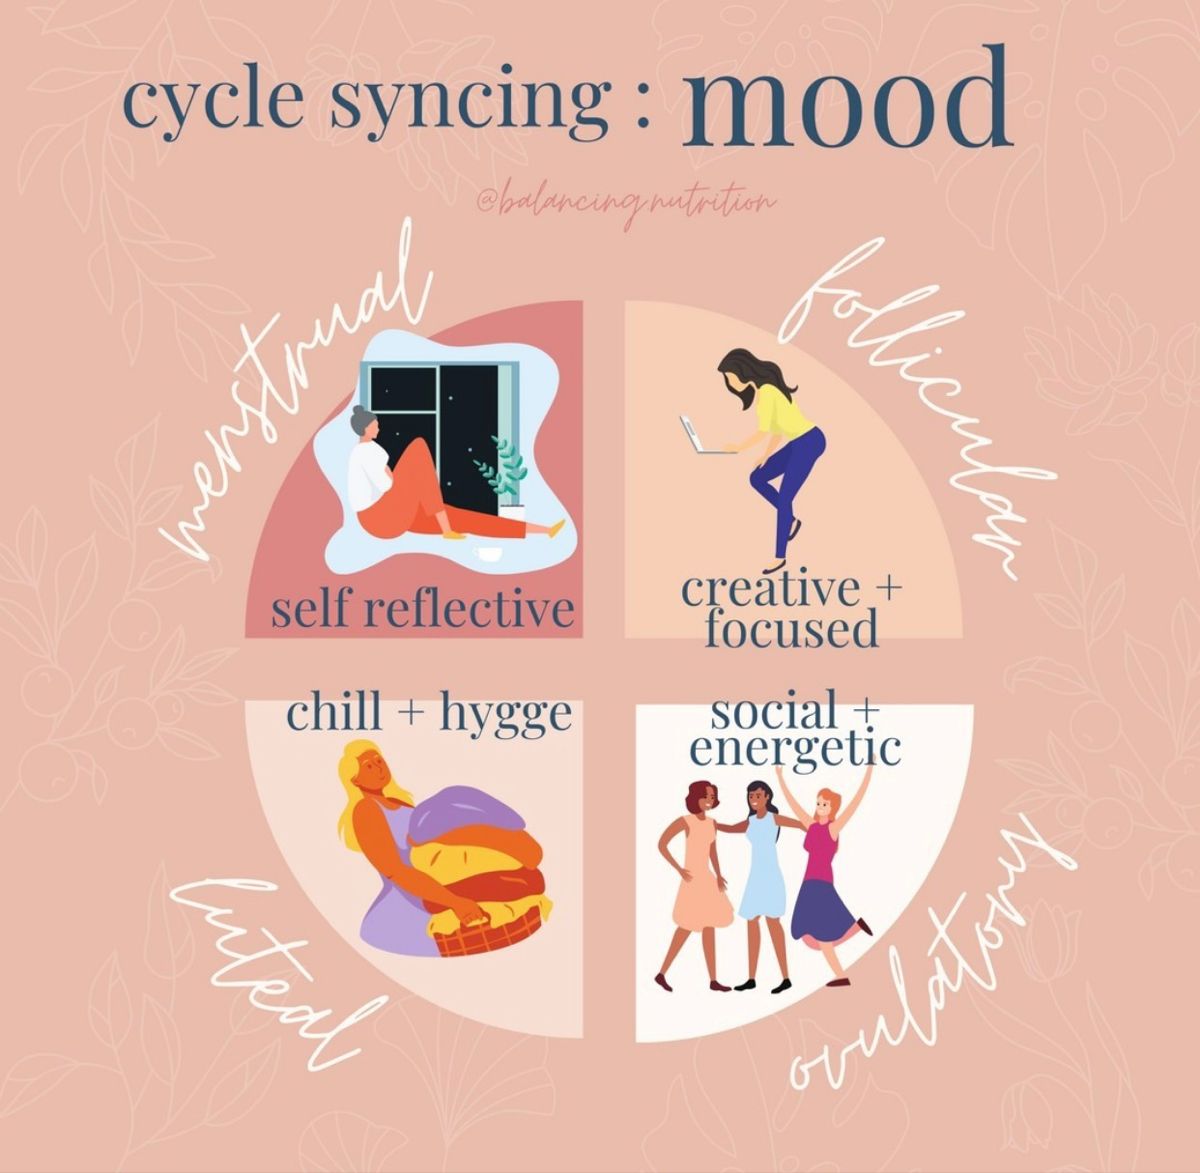 Menstrual cycle syncing